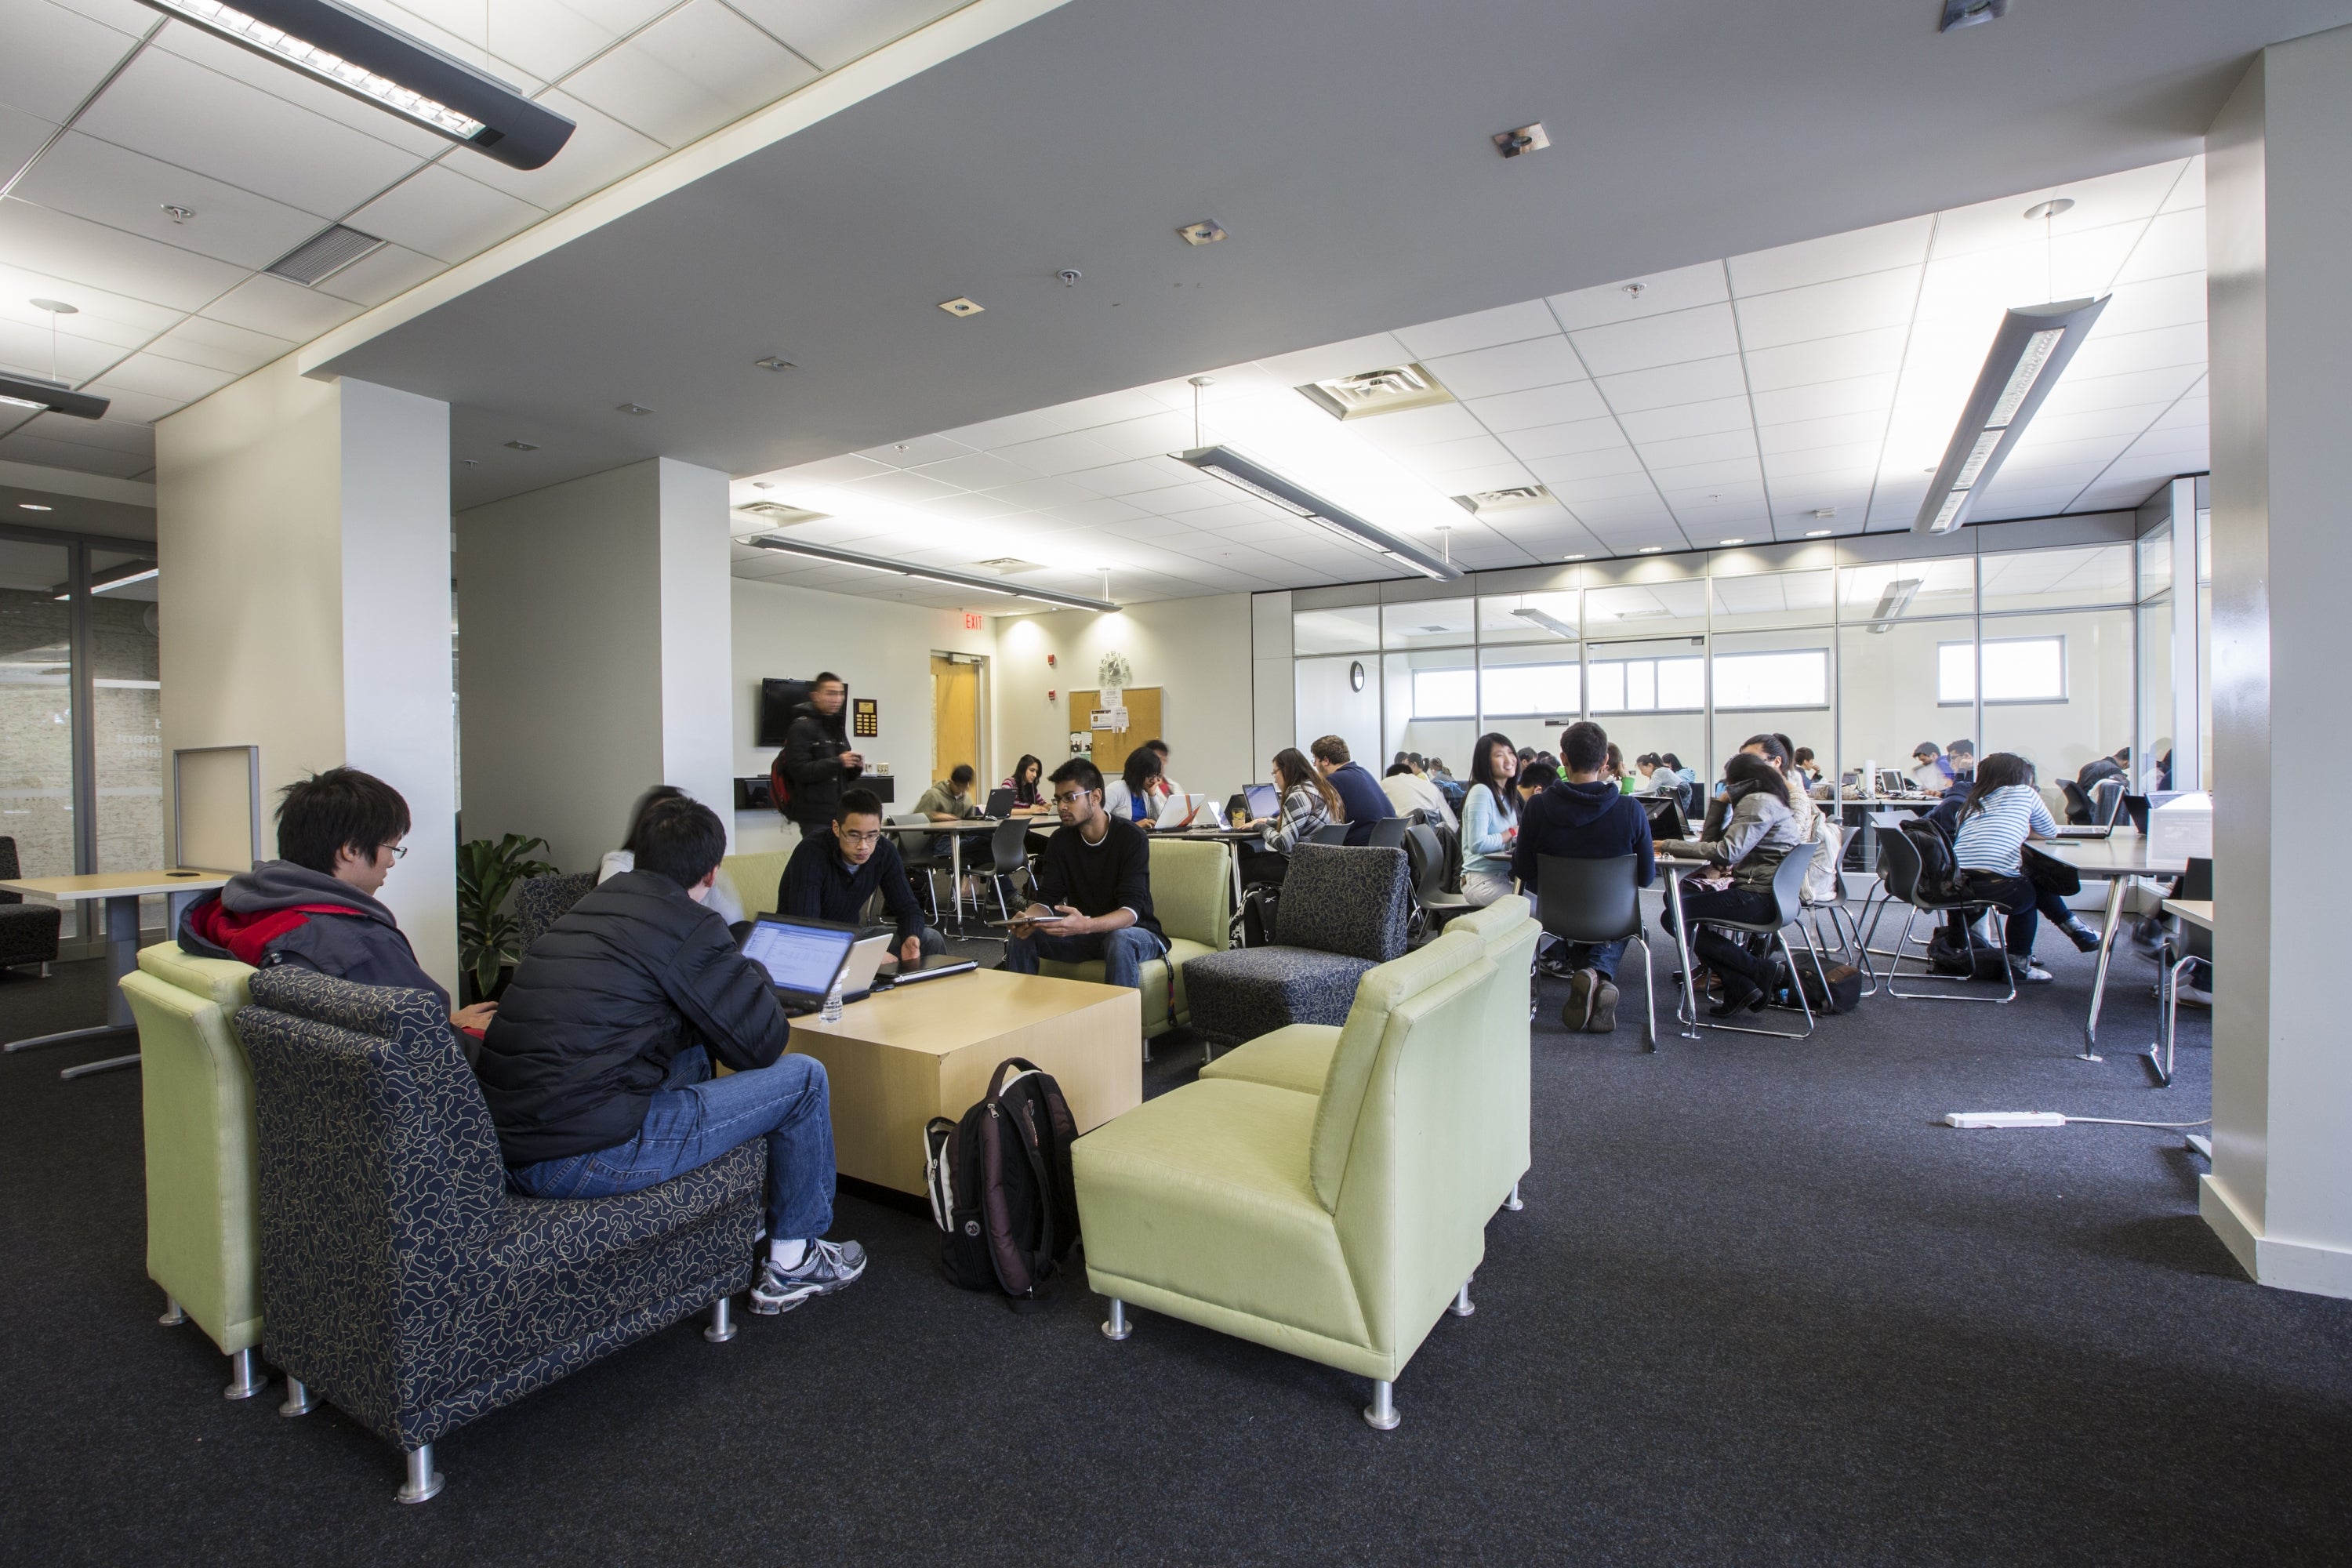 Open concept, the CPA Student Lounge is equipped with comfy chairs, tables, and quiety study areas.